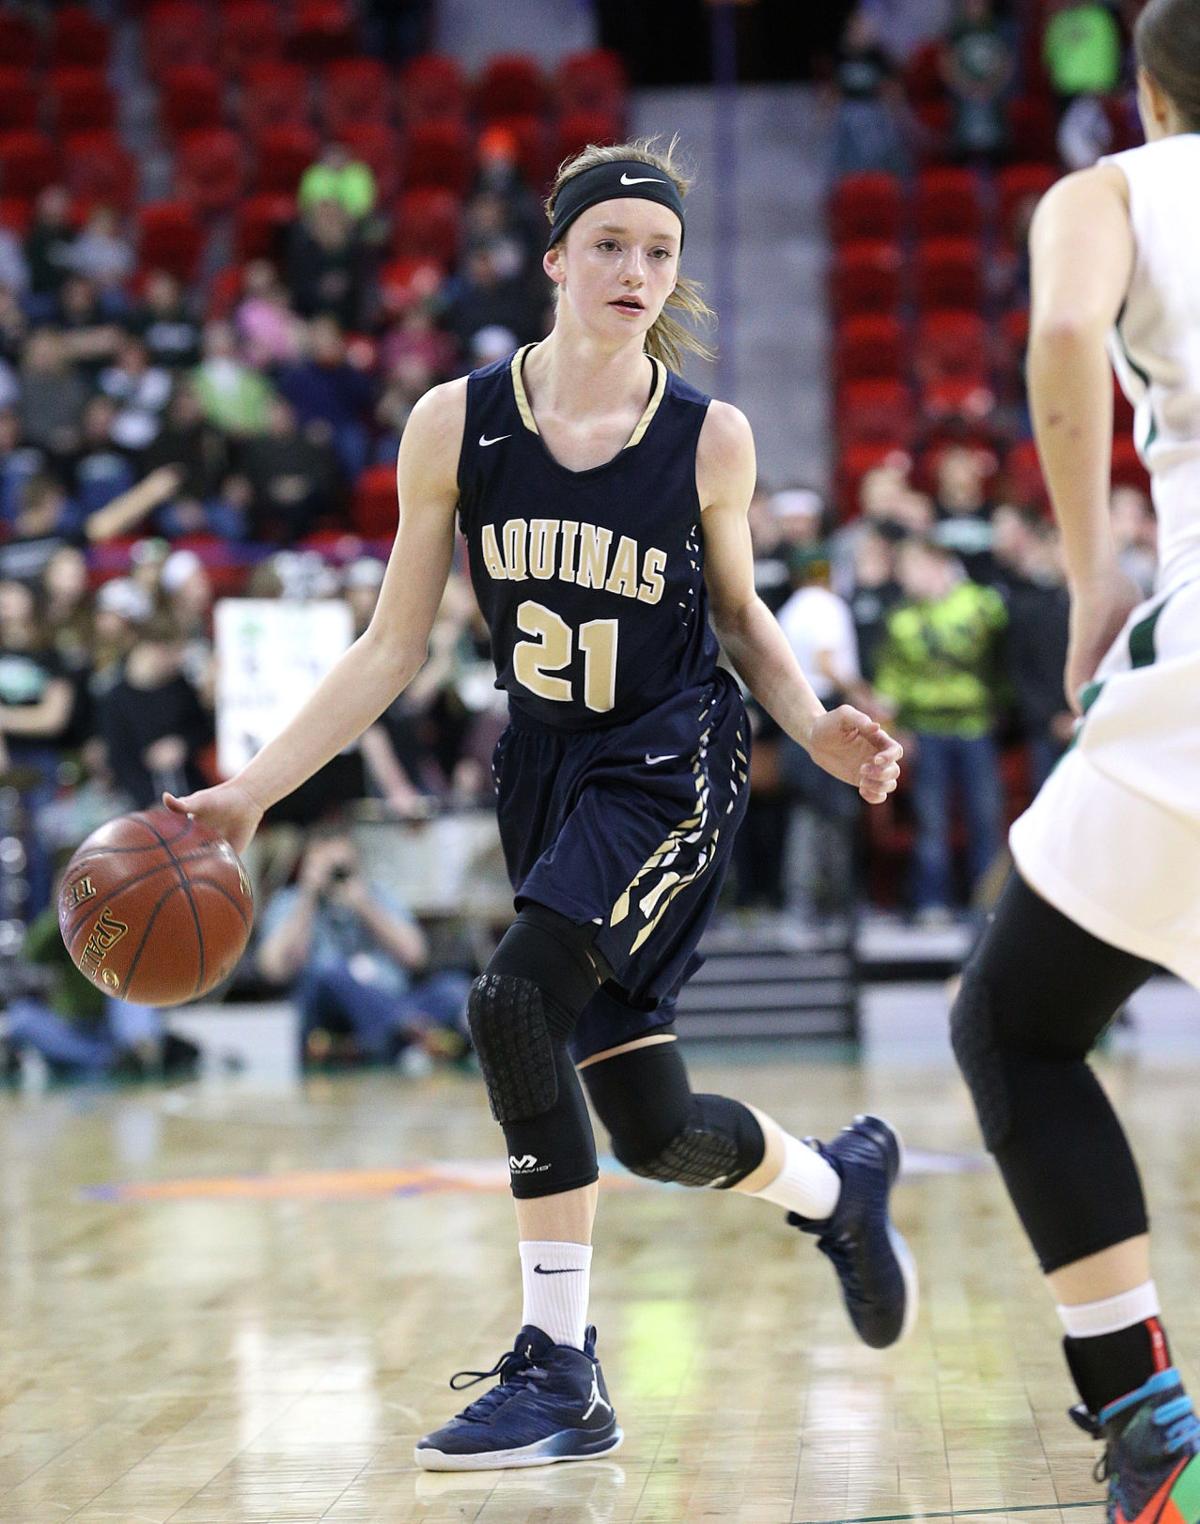 Girls High School Basketball Blugolds Try To Stay In The Moment Ahead Of State Title Game Preps Lacrossetribune Com